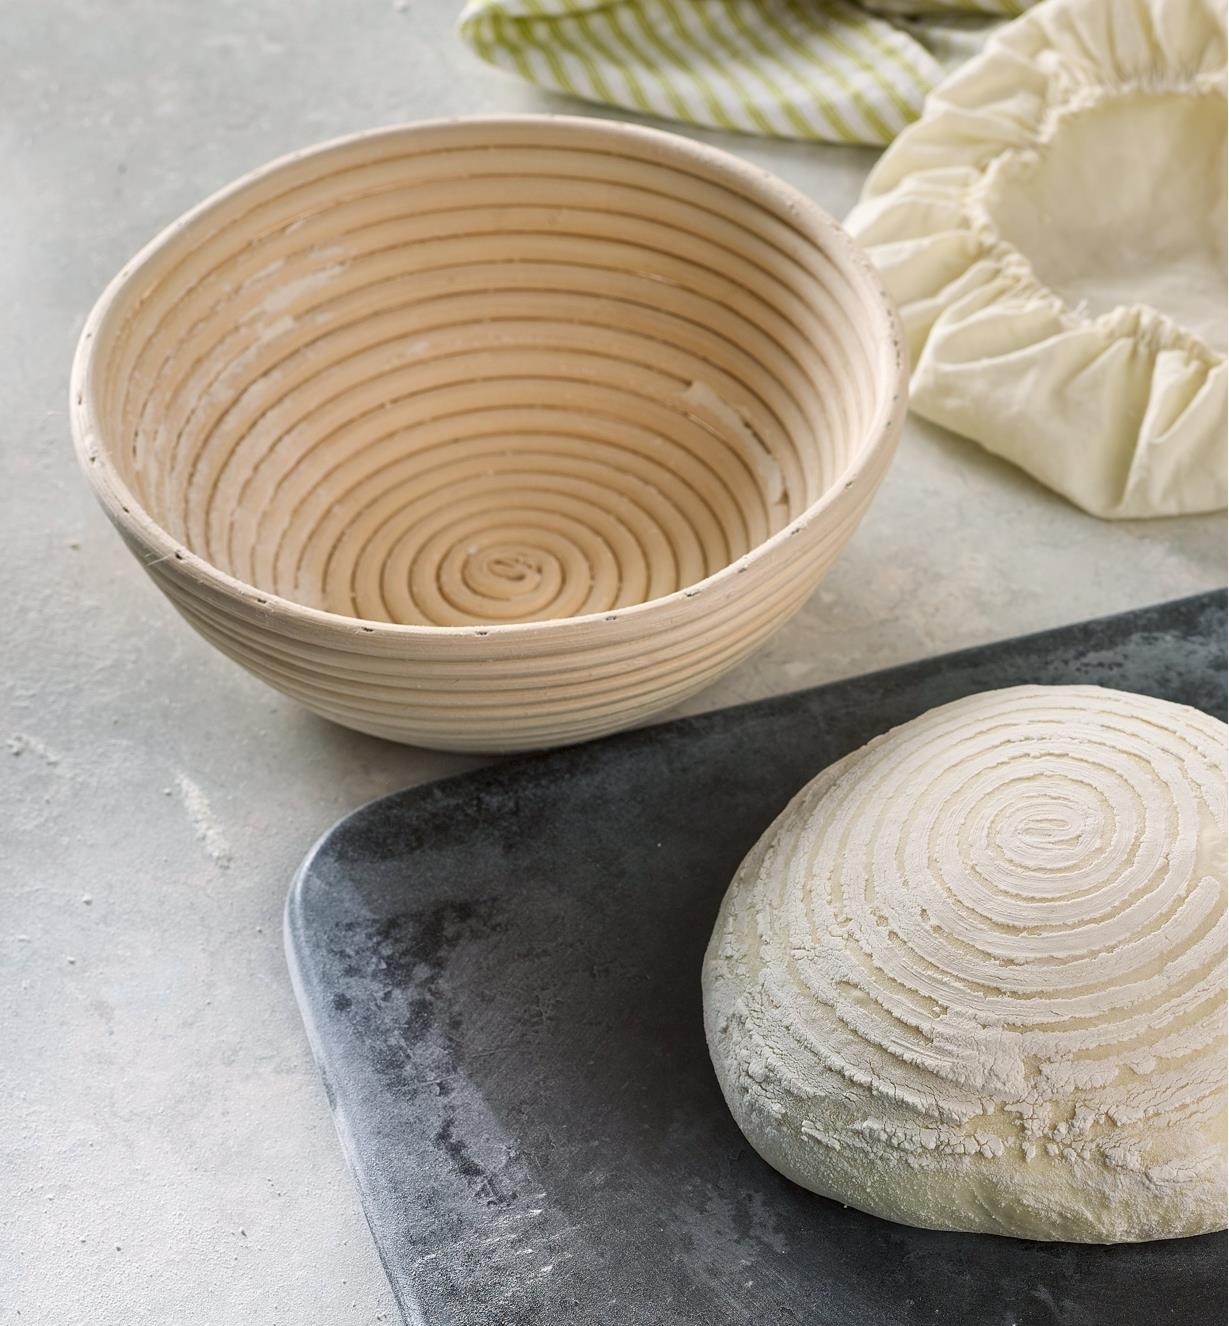 An empty round banneton is shown beside bread dough that is imprinted with the round banneton’s coil pattern